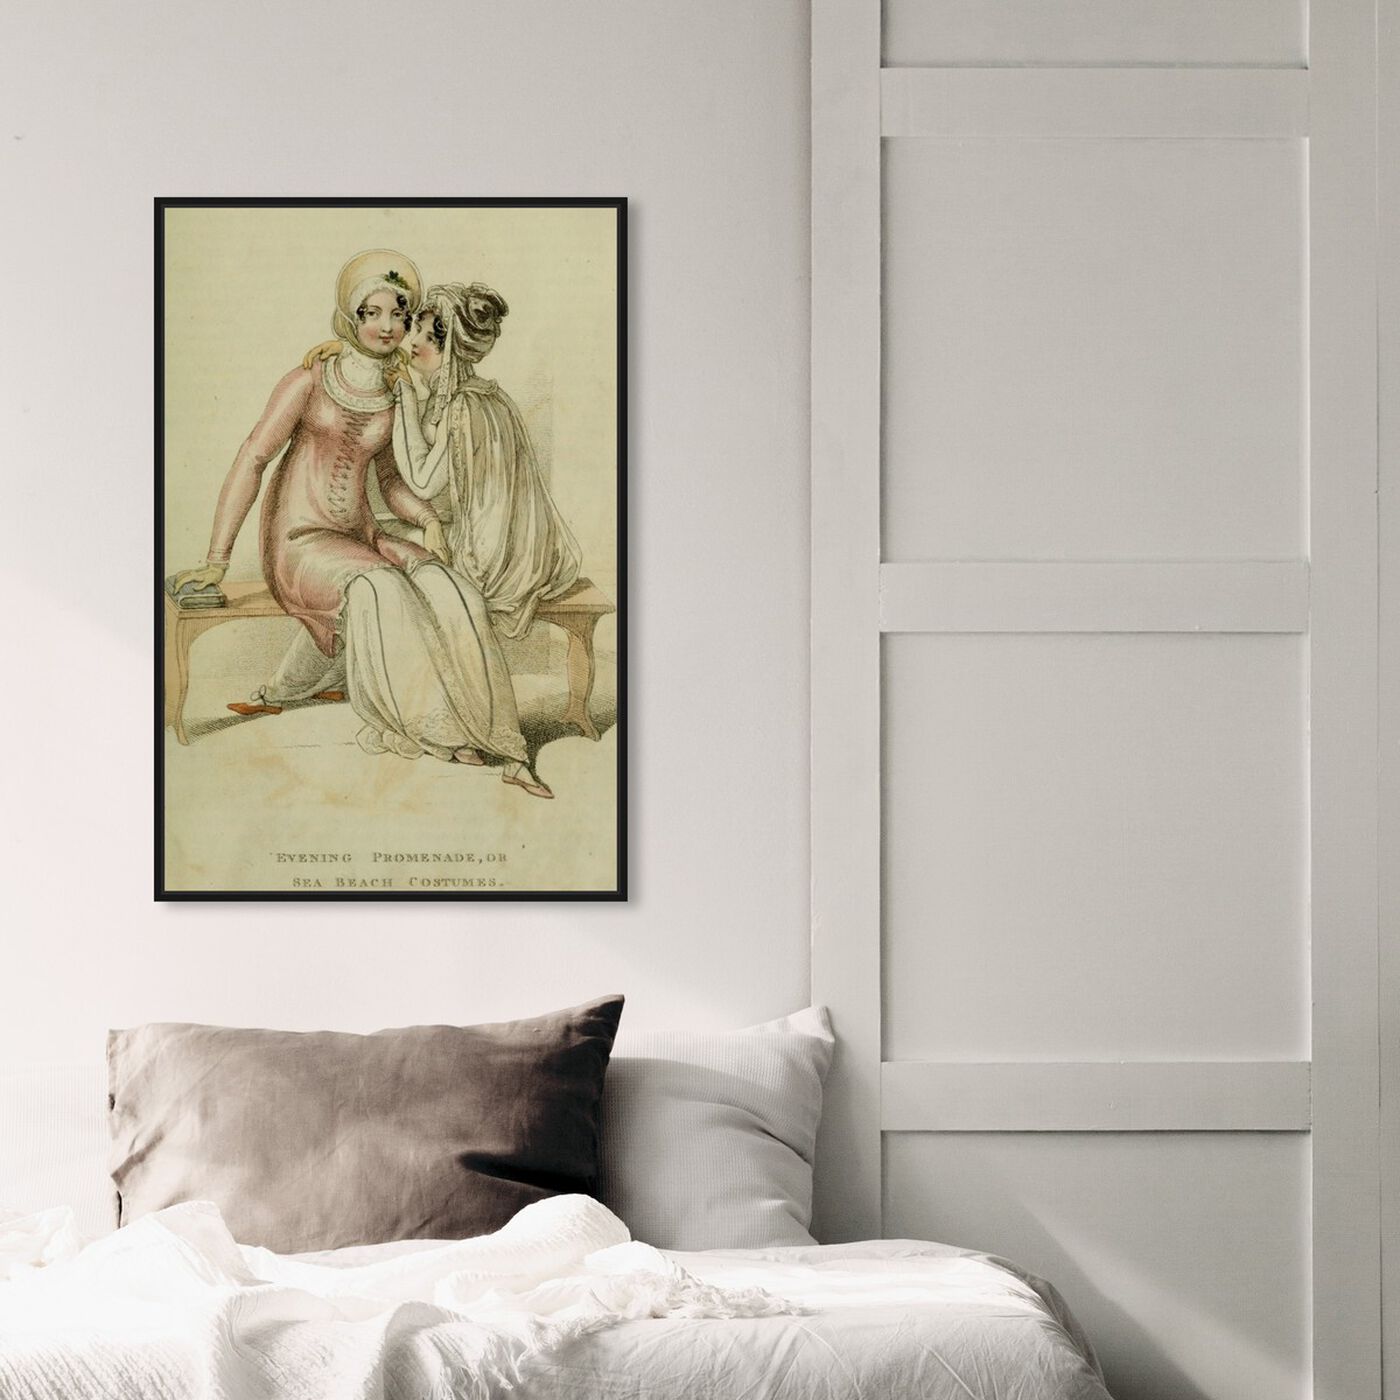 Hanging view of Evening Promenade - The Art Cabinet featuring classic and figurative and realism art.